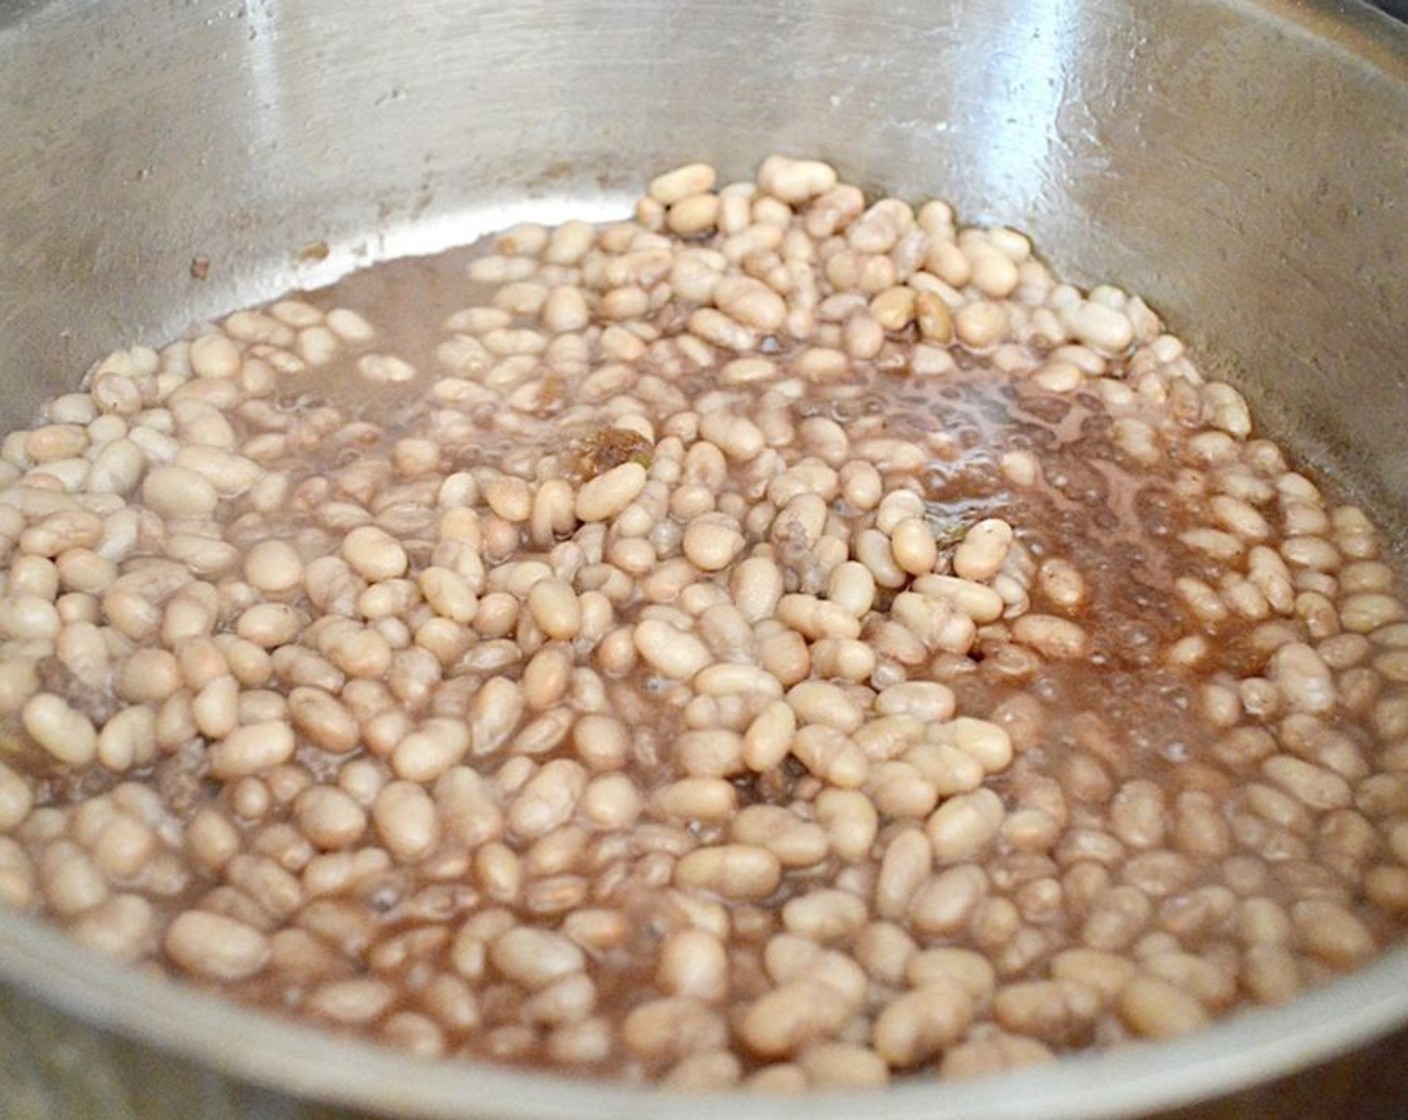 step 3 Pour in the White Beans (1 can) and Red Wine (1/4 cup), using the spoon to scrape up any brown bits at the bottom of the pan as the wine deglazes it. Let the beans, garlic, and wine cook together for a couple of minutes.